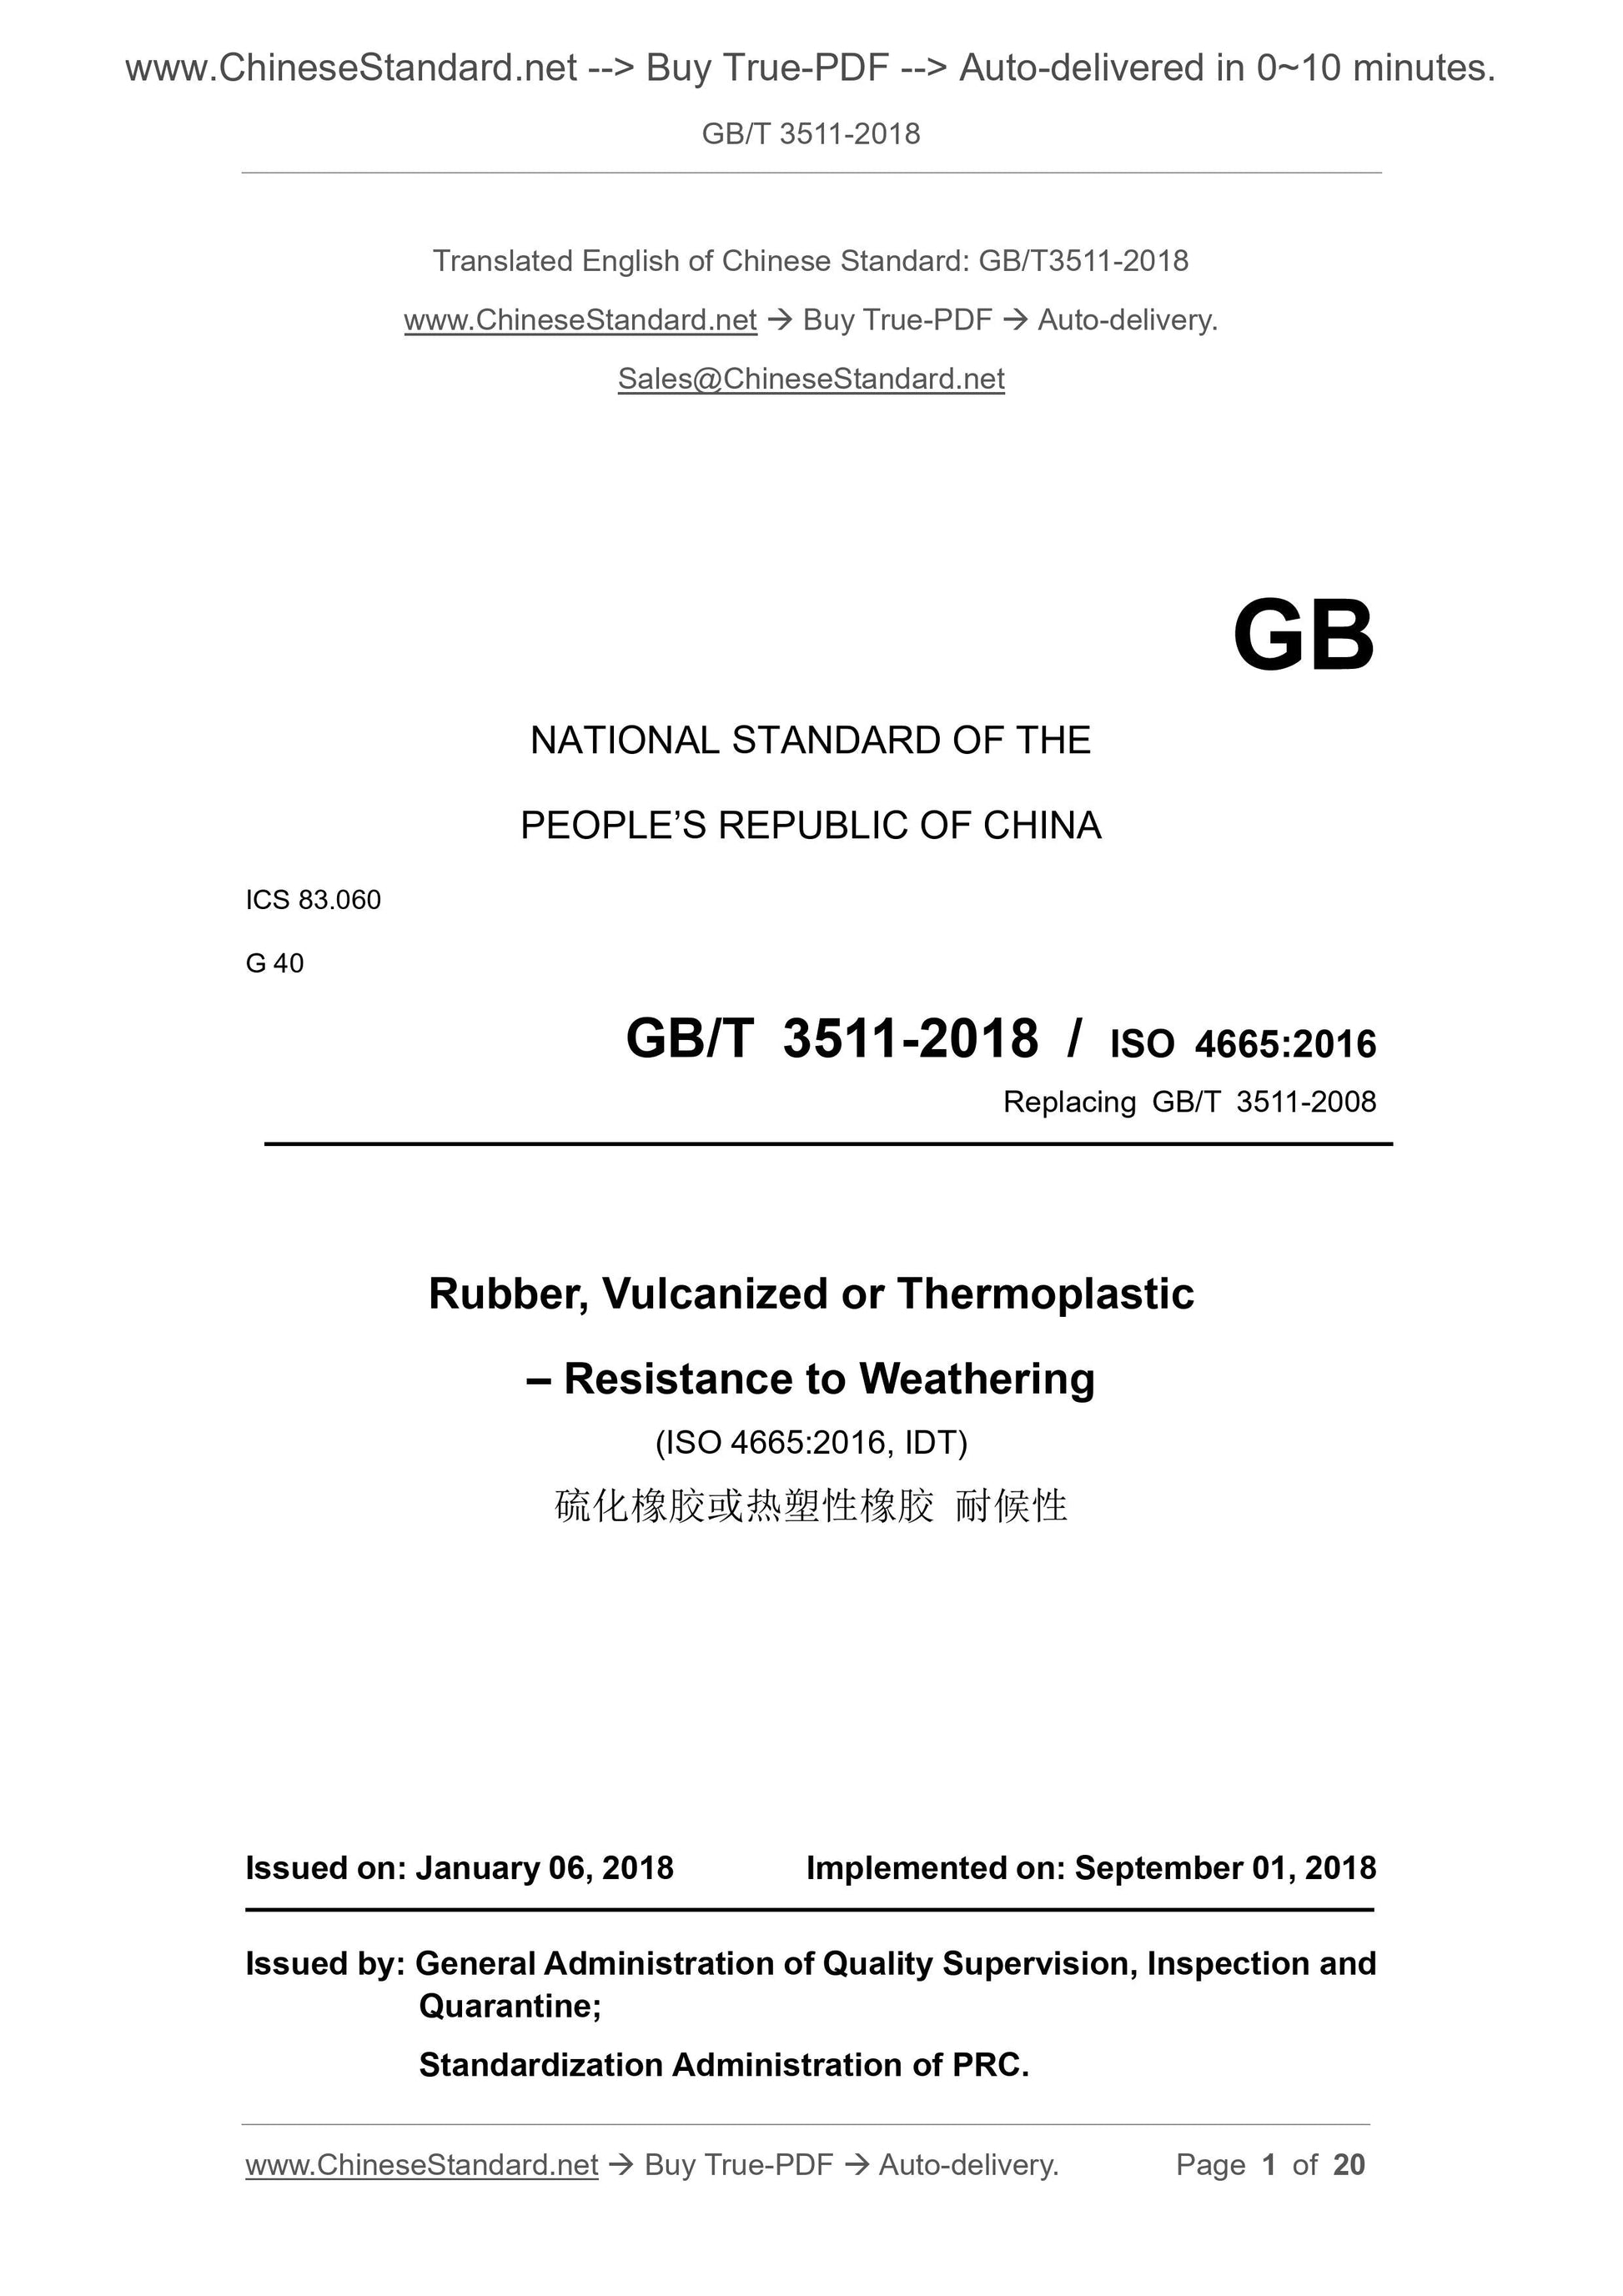 GB/T 3511-2018 Page 1